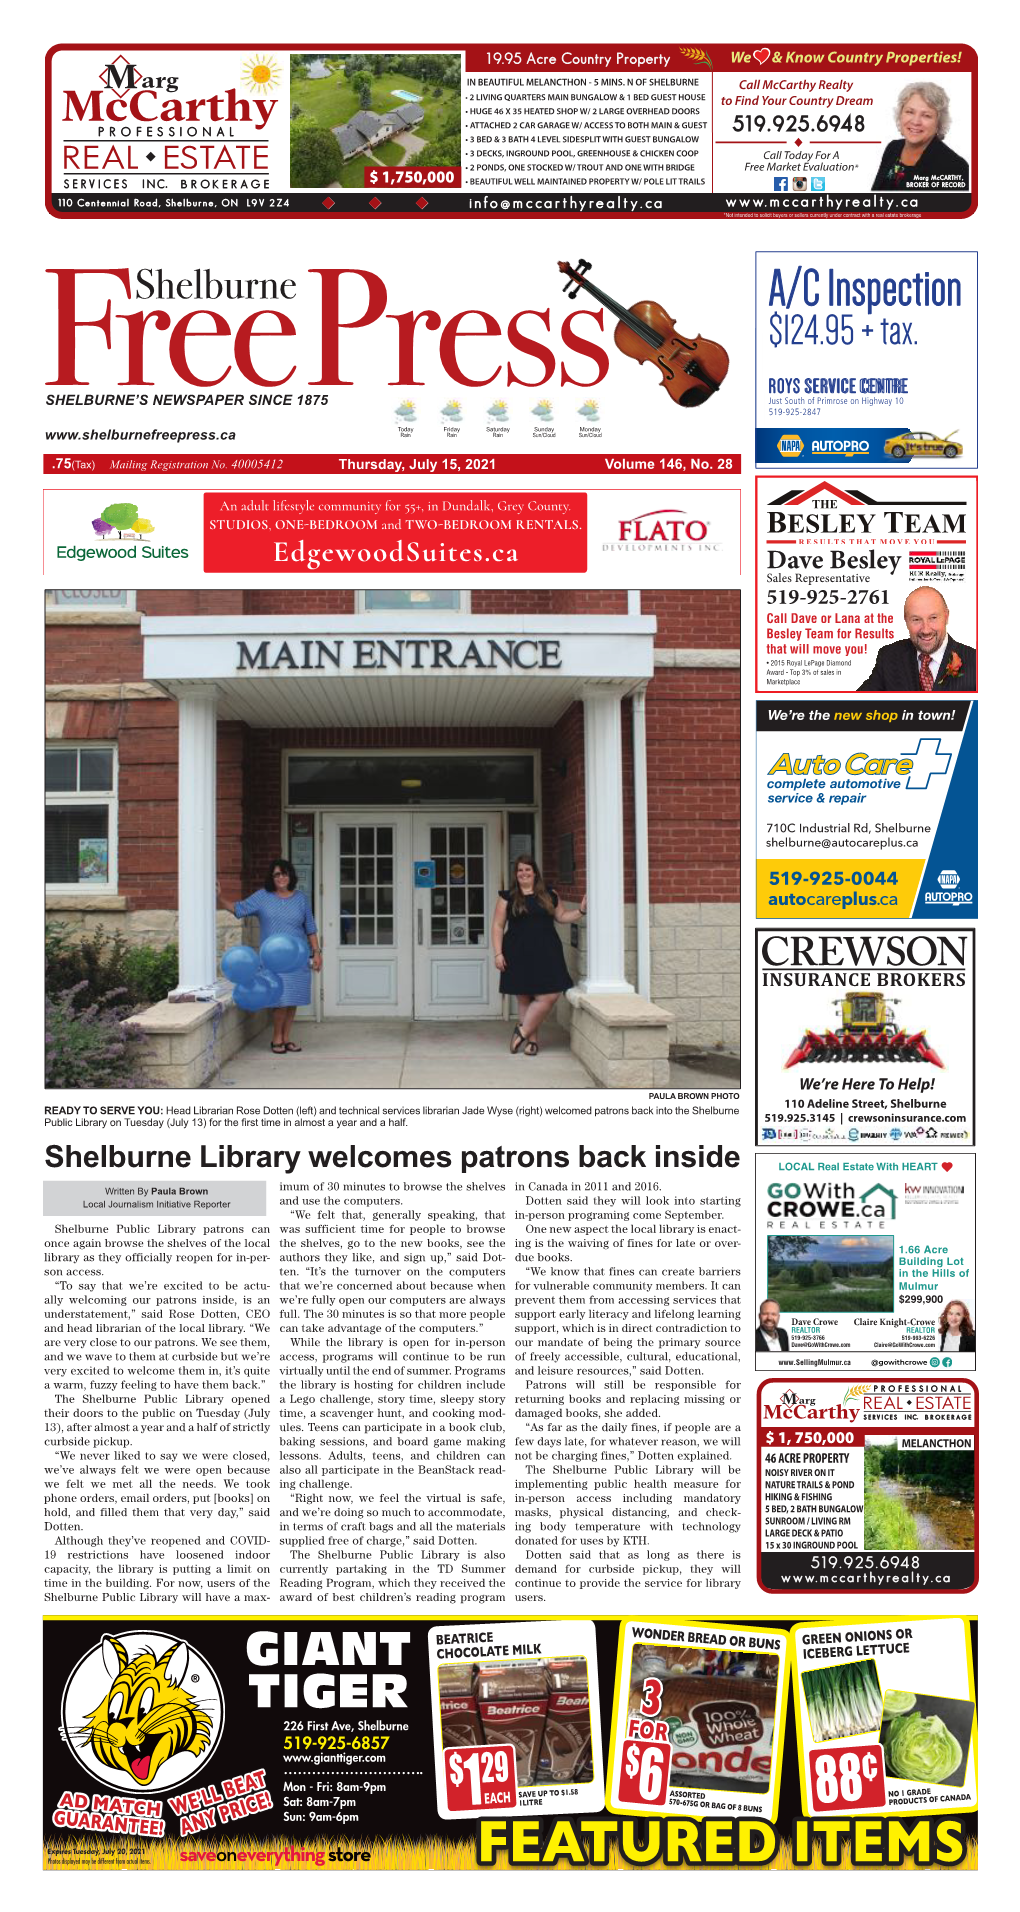 FEATURED ITEMS $288 60¢ Page 2 the SHELBURNE FREE PRESS, Thursday, July 15, 2021 Progress Being Made on Shelburne Splash Pad Initiative